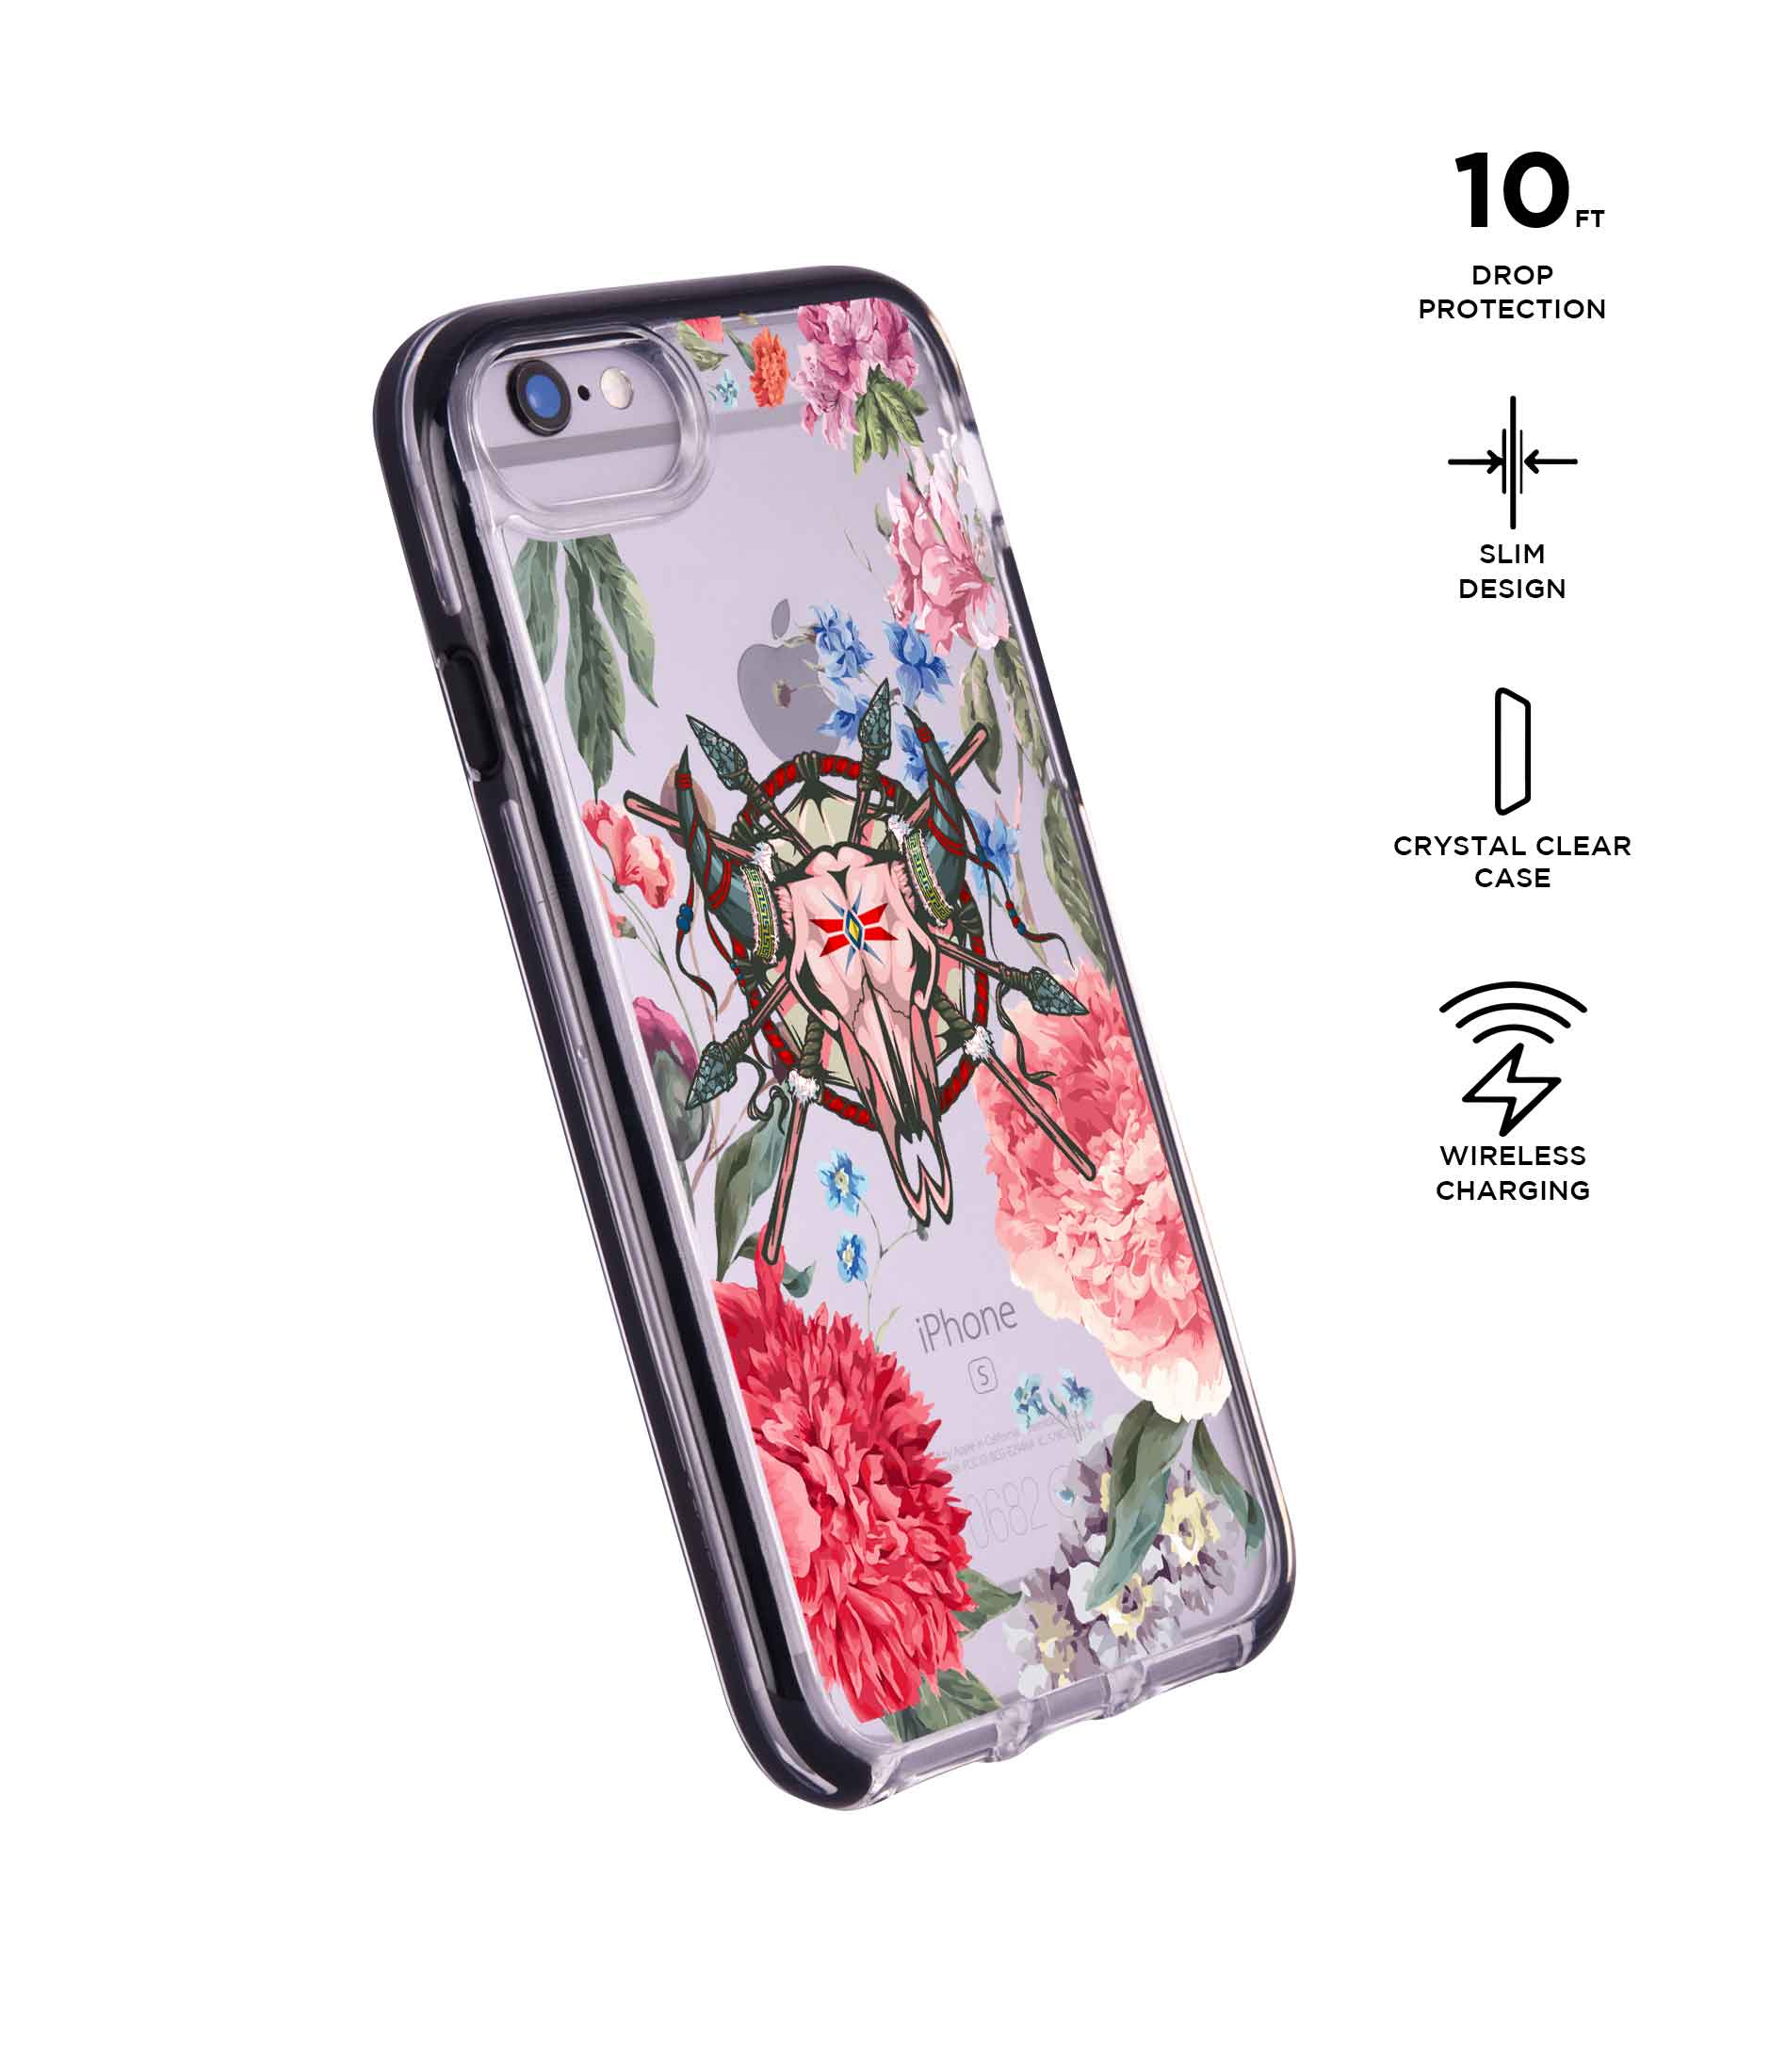 Floral Symmetry - Extreme Phone Case for iPhone 6